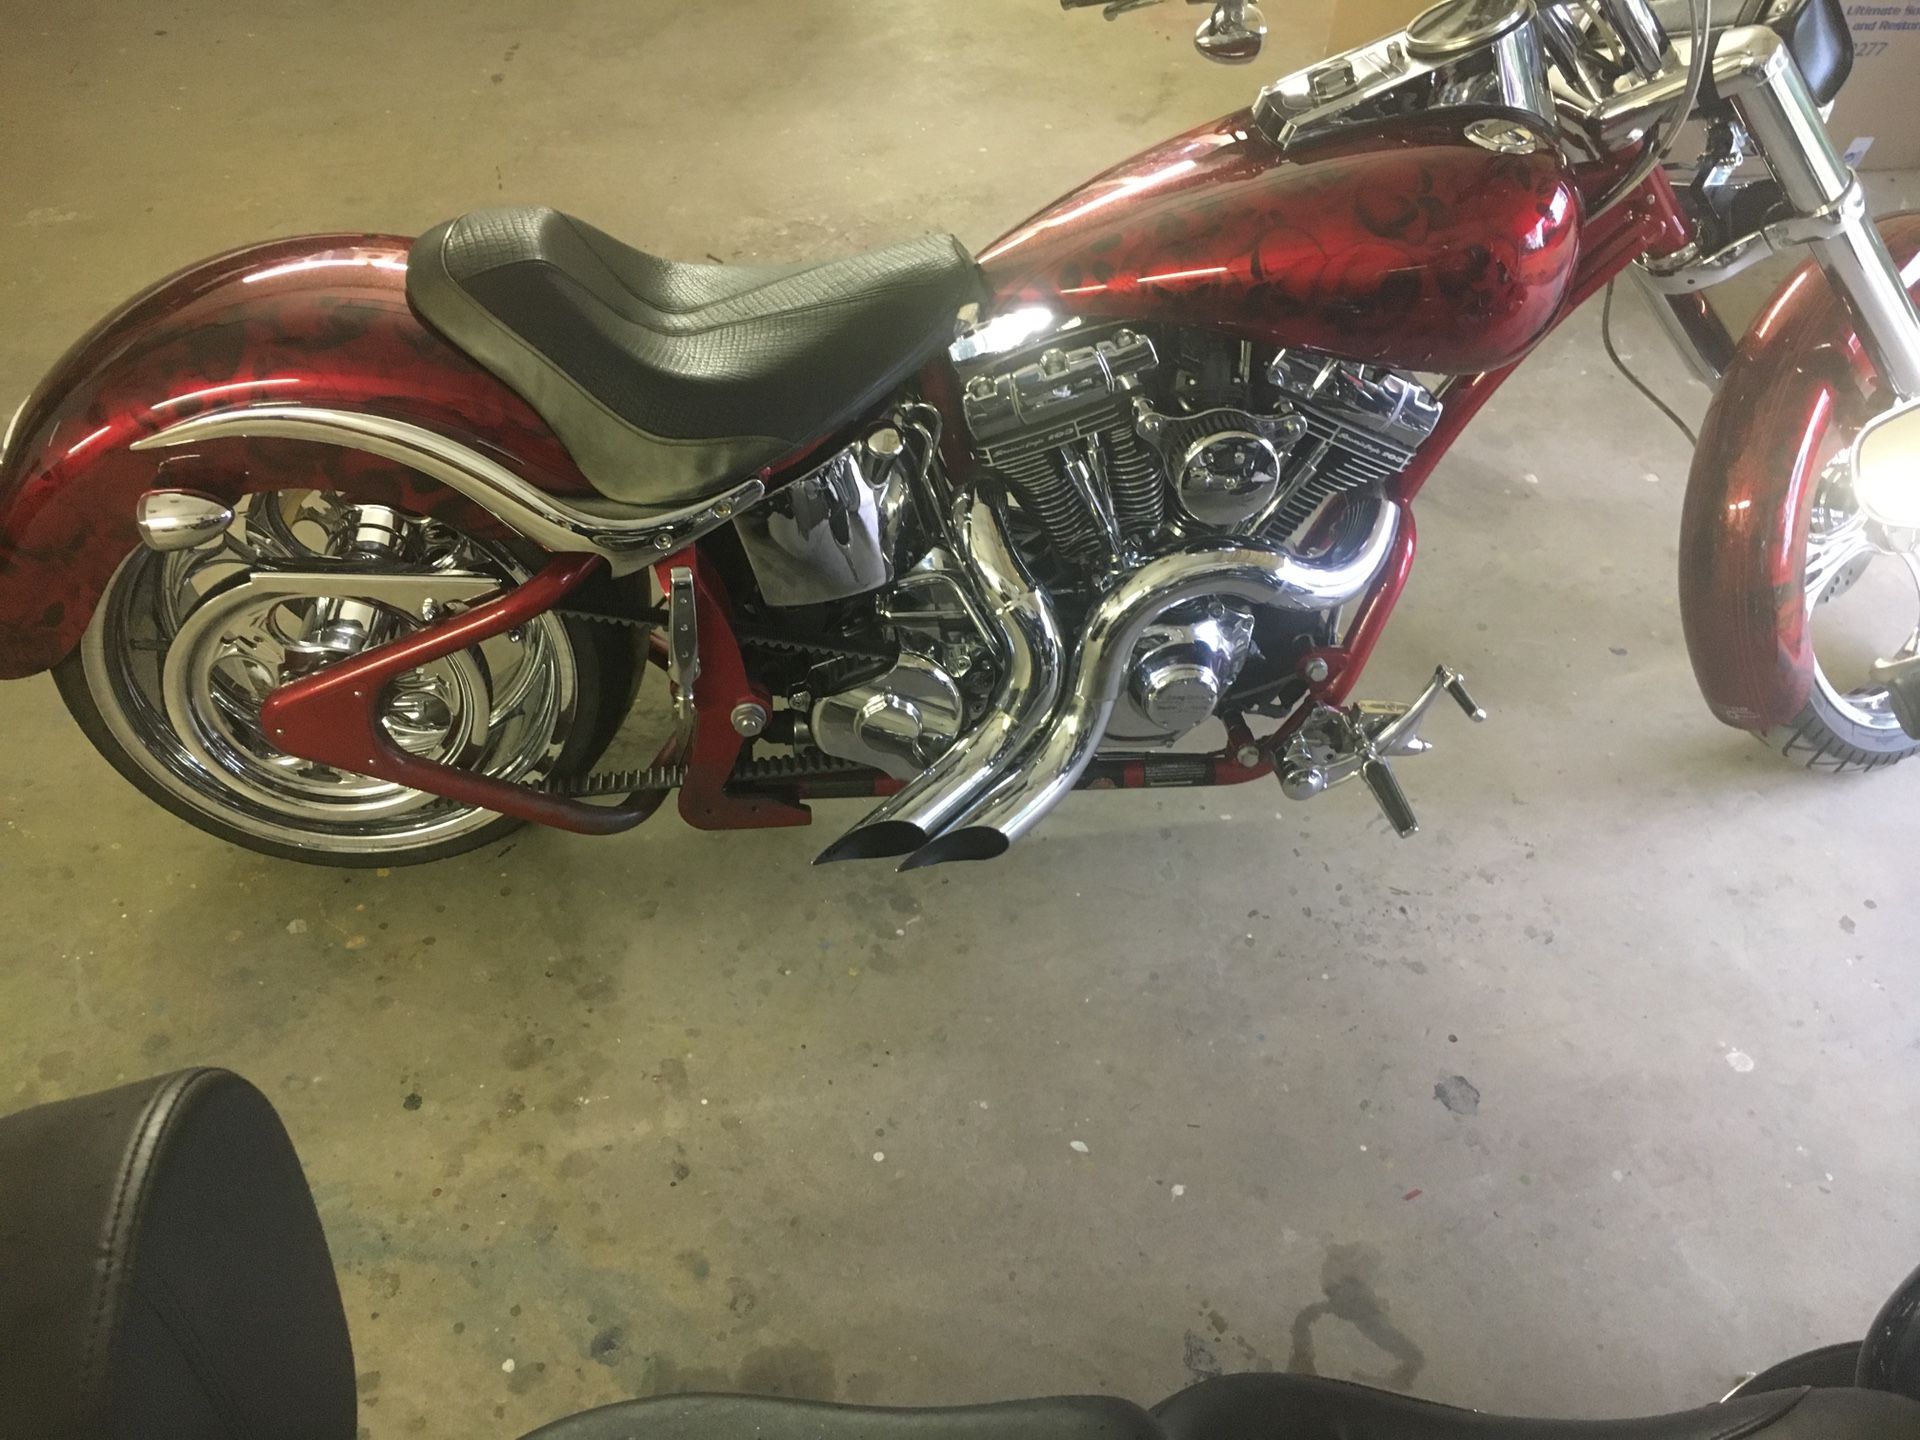 Custom softail only 4000 miles on it